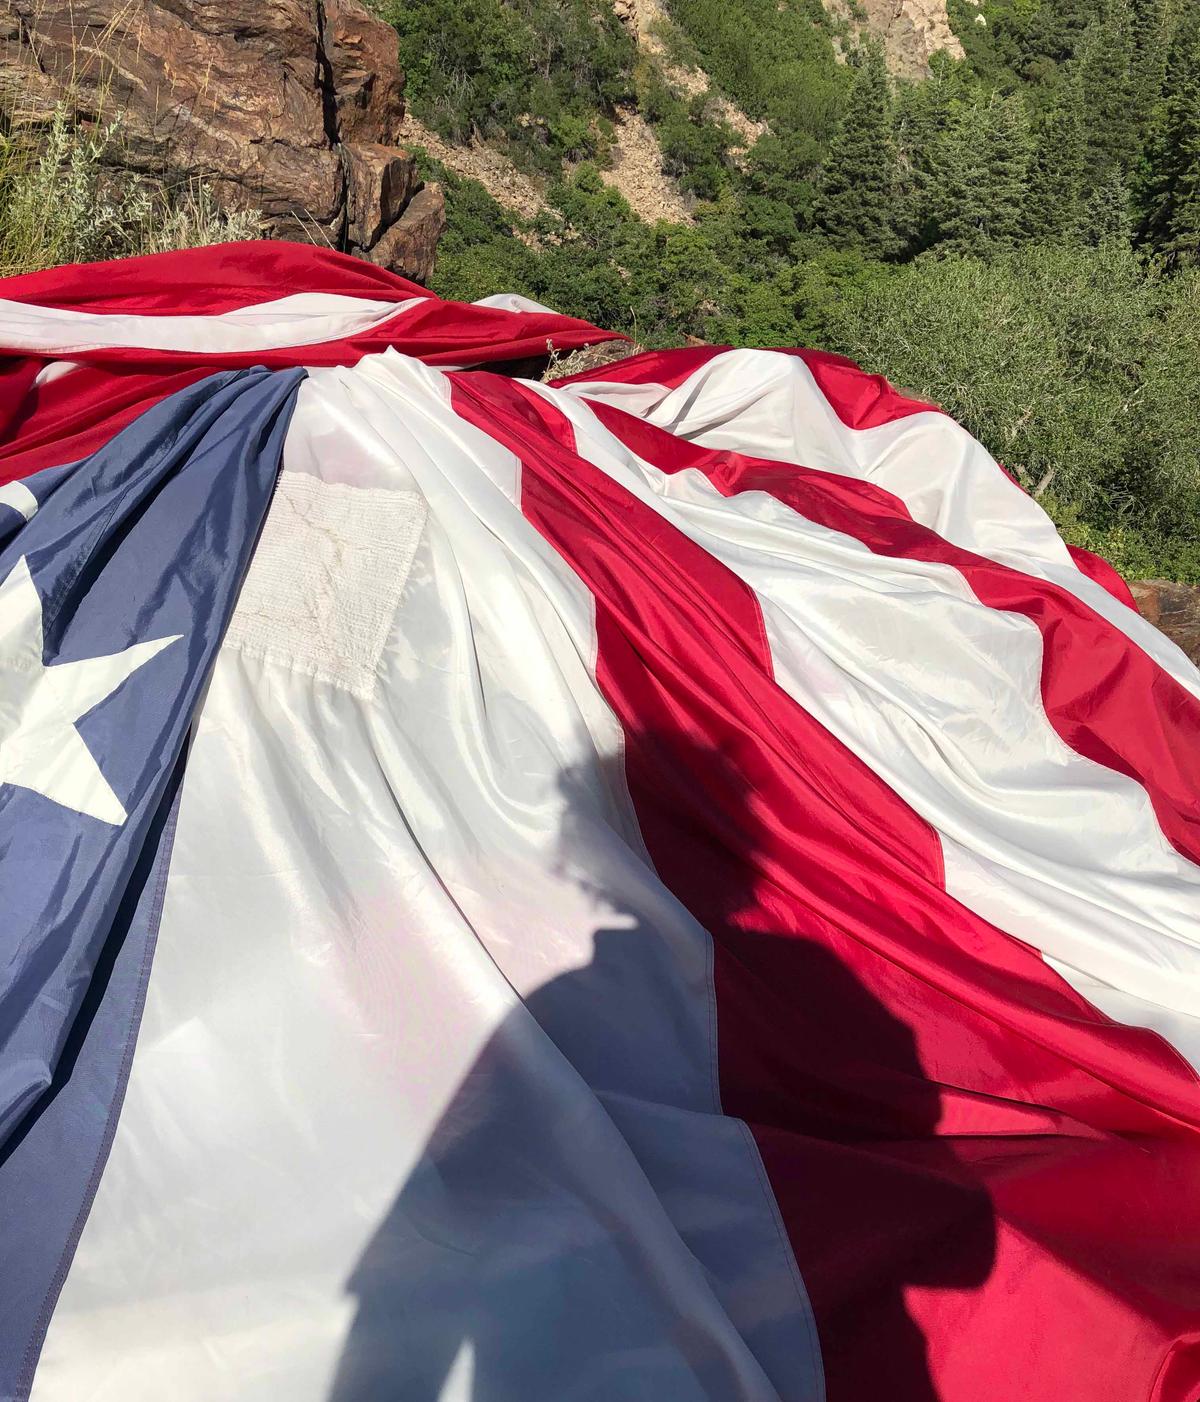 Lexie spotted ol' glory draped on the side of Utah's Little Willow Canyon. (Courtesy of <a href="https://www.facebook.com/dnord">Darren Nord</a>)